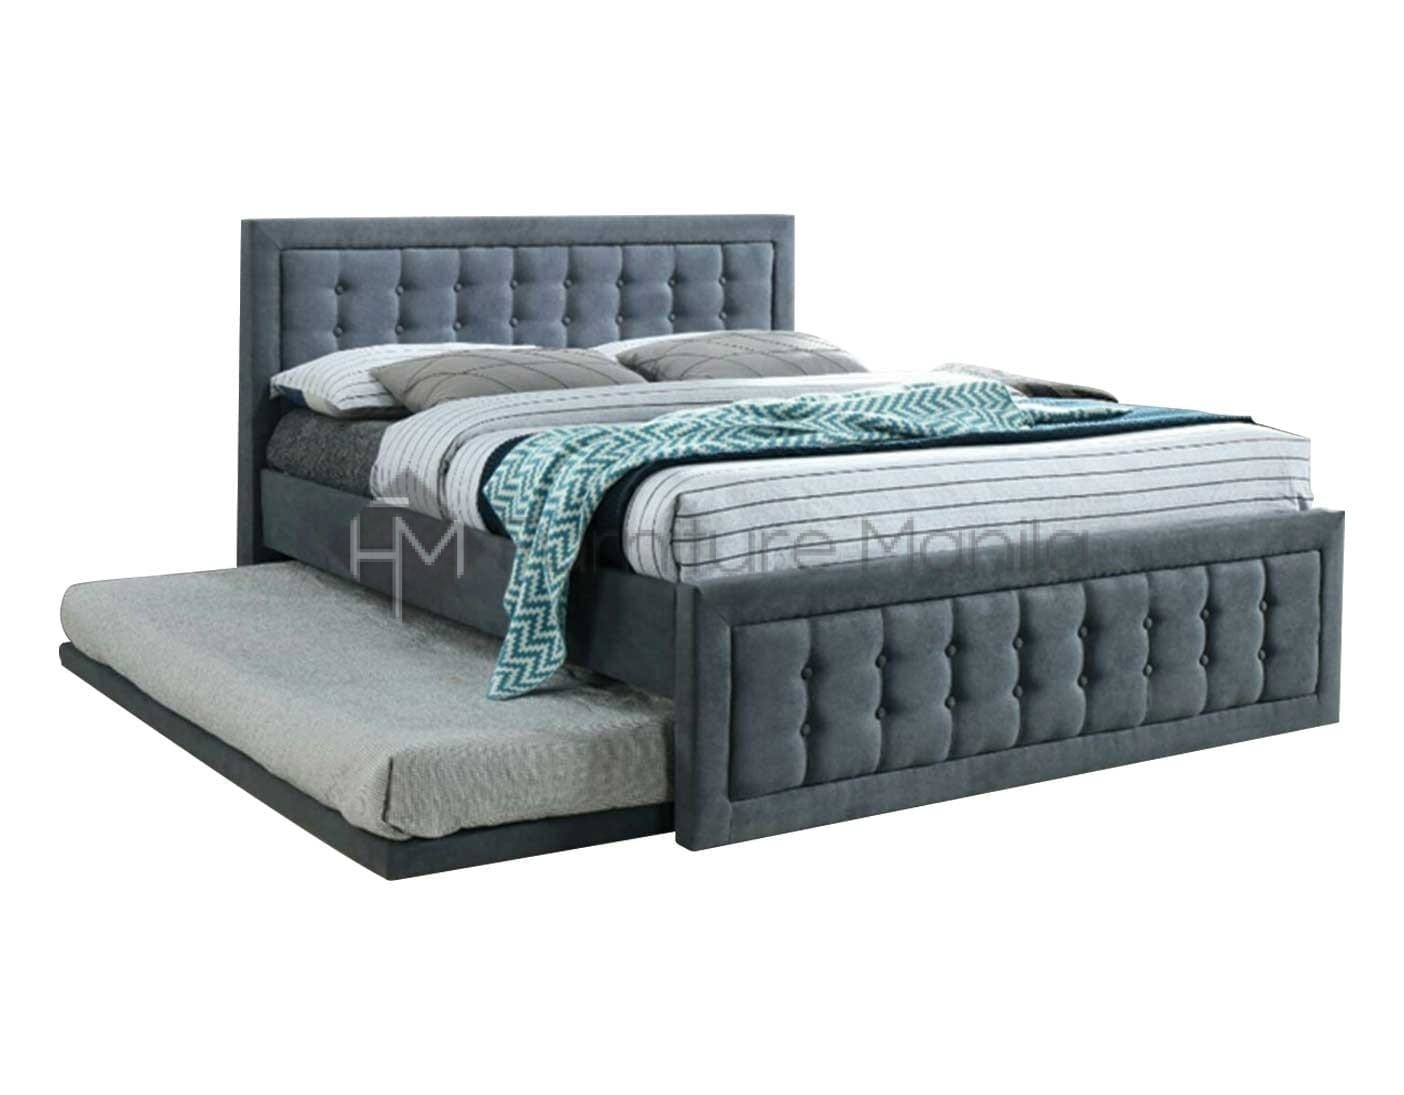 Divan queen bed frame with pull out furniture manila 1